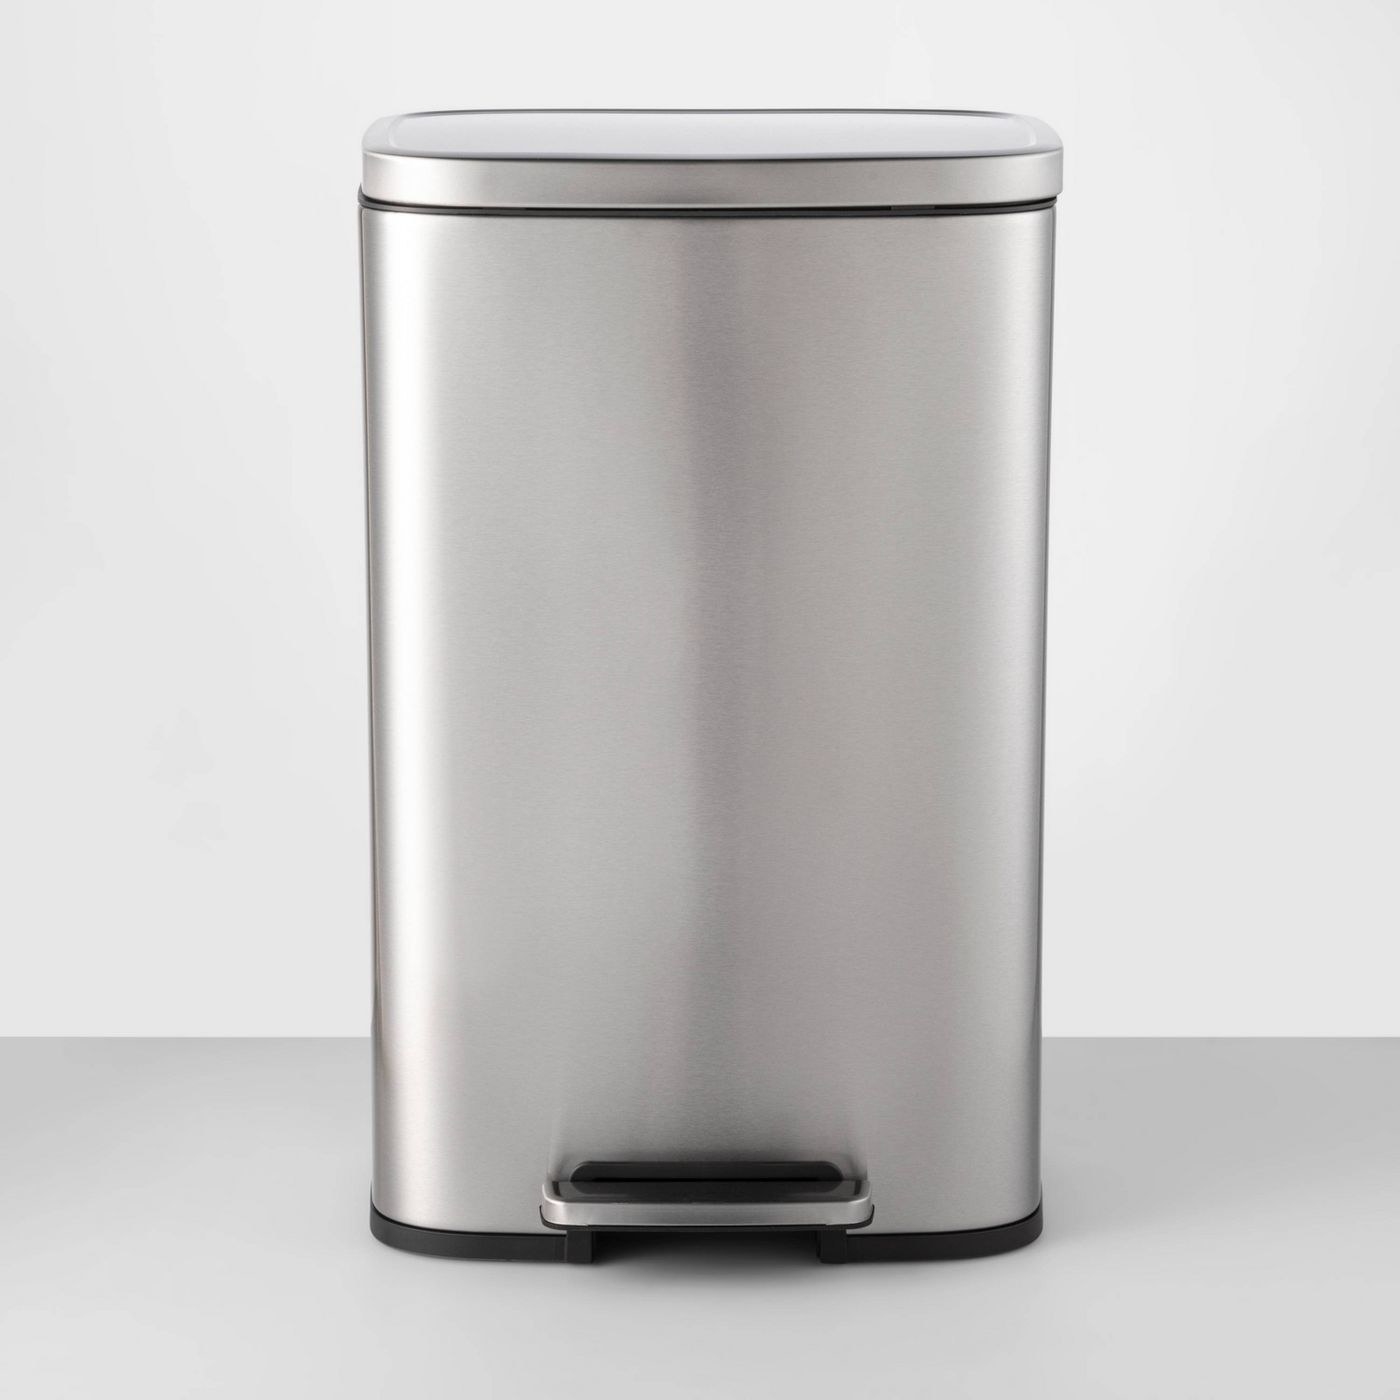 the silver trash can